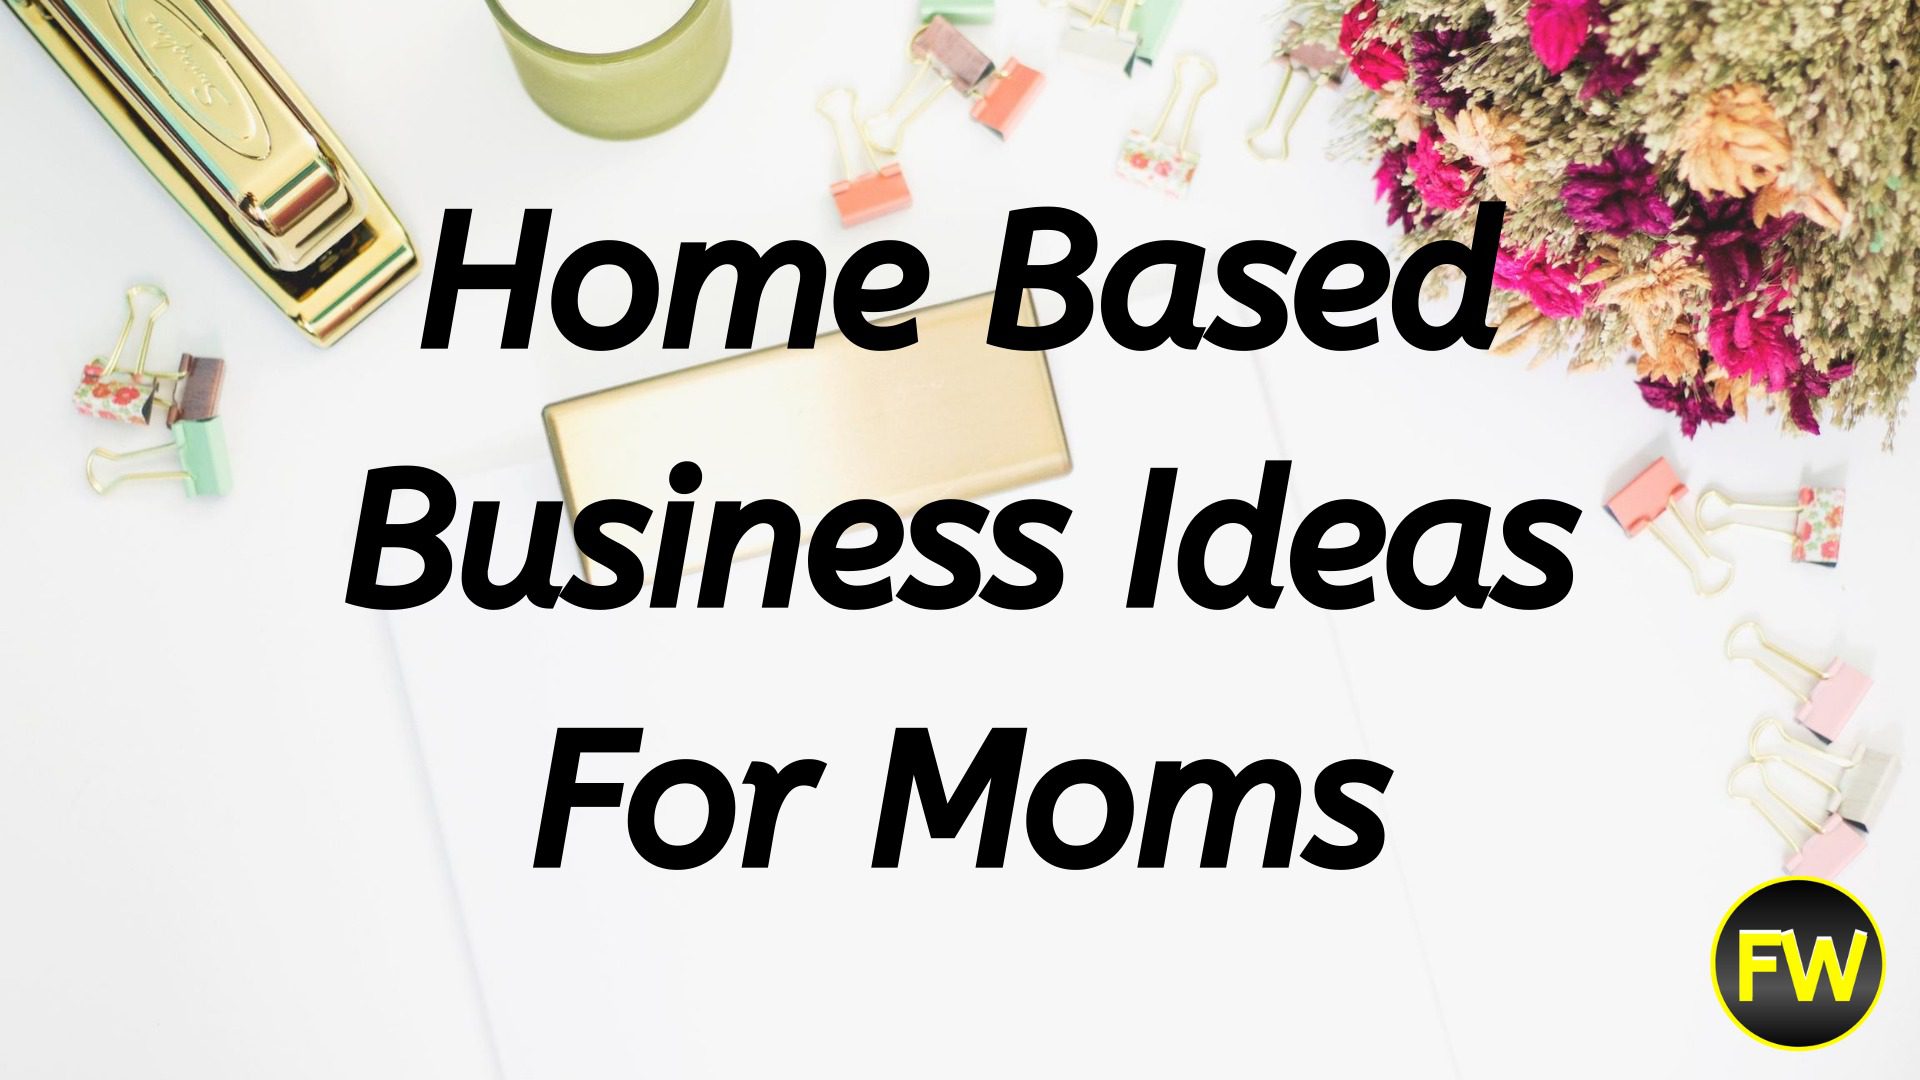 home based business ideas for moms in the philippines